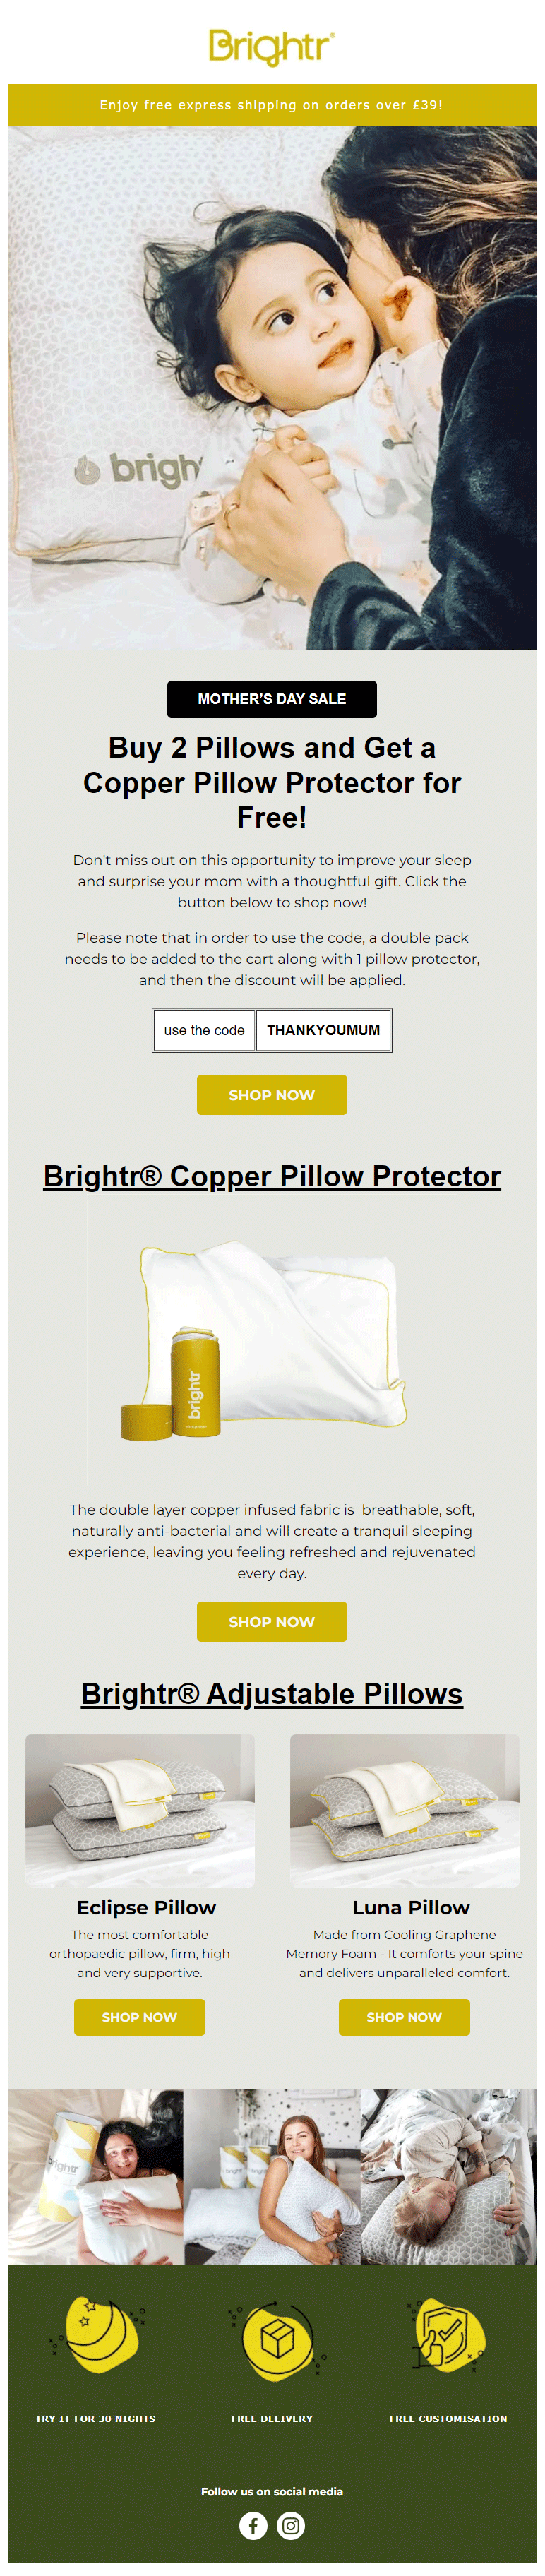 Brightr-mother's day email